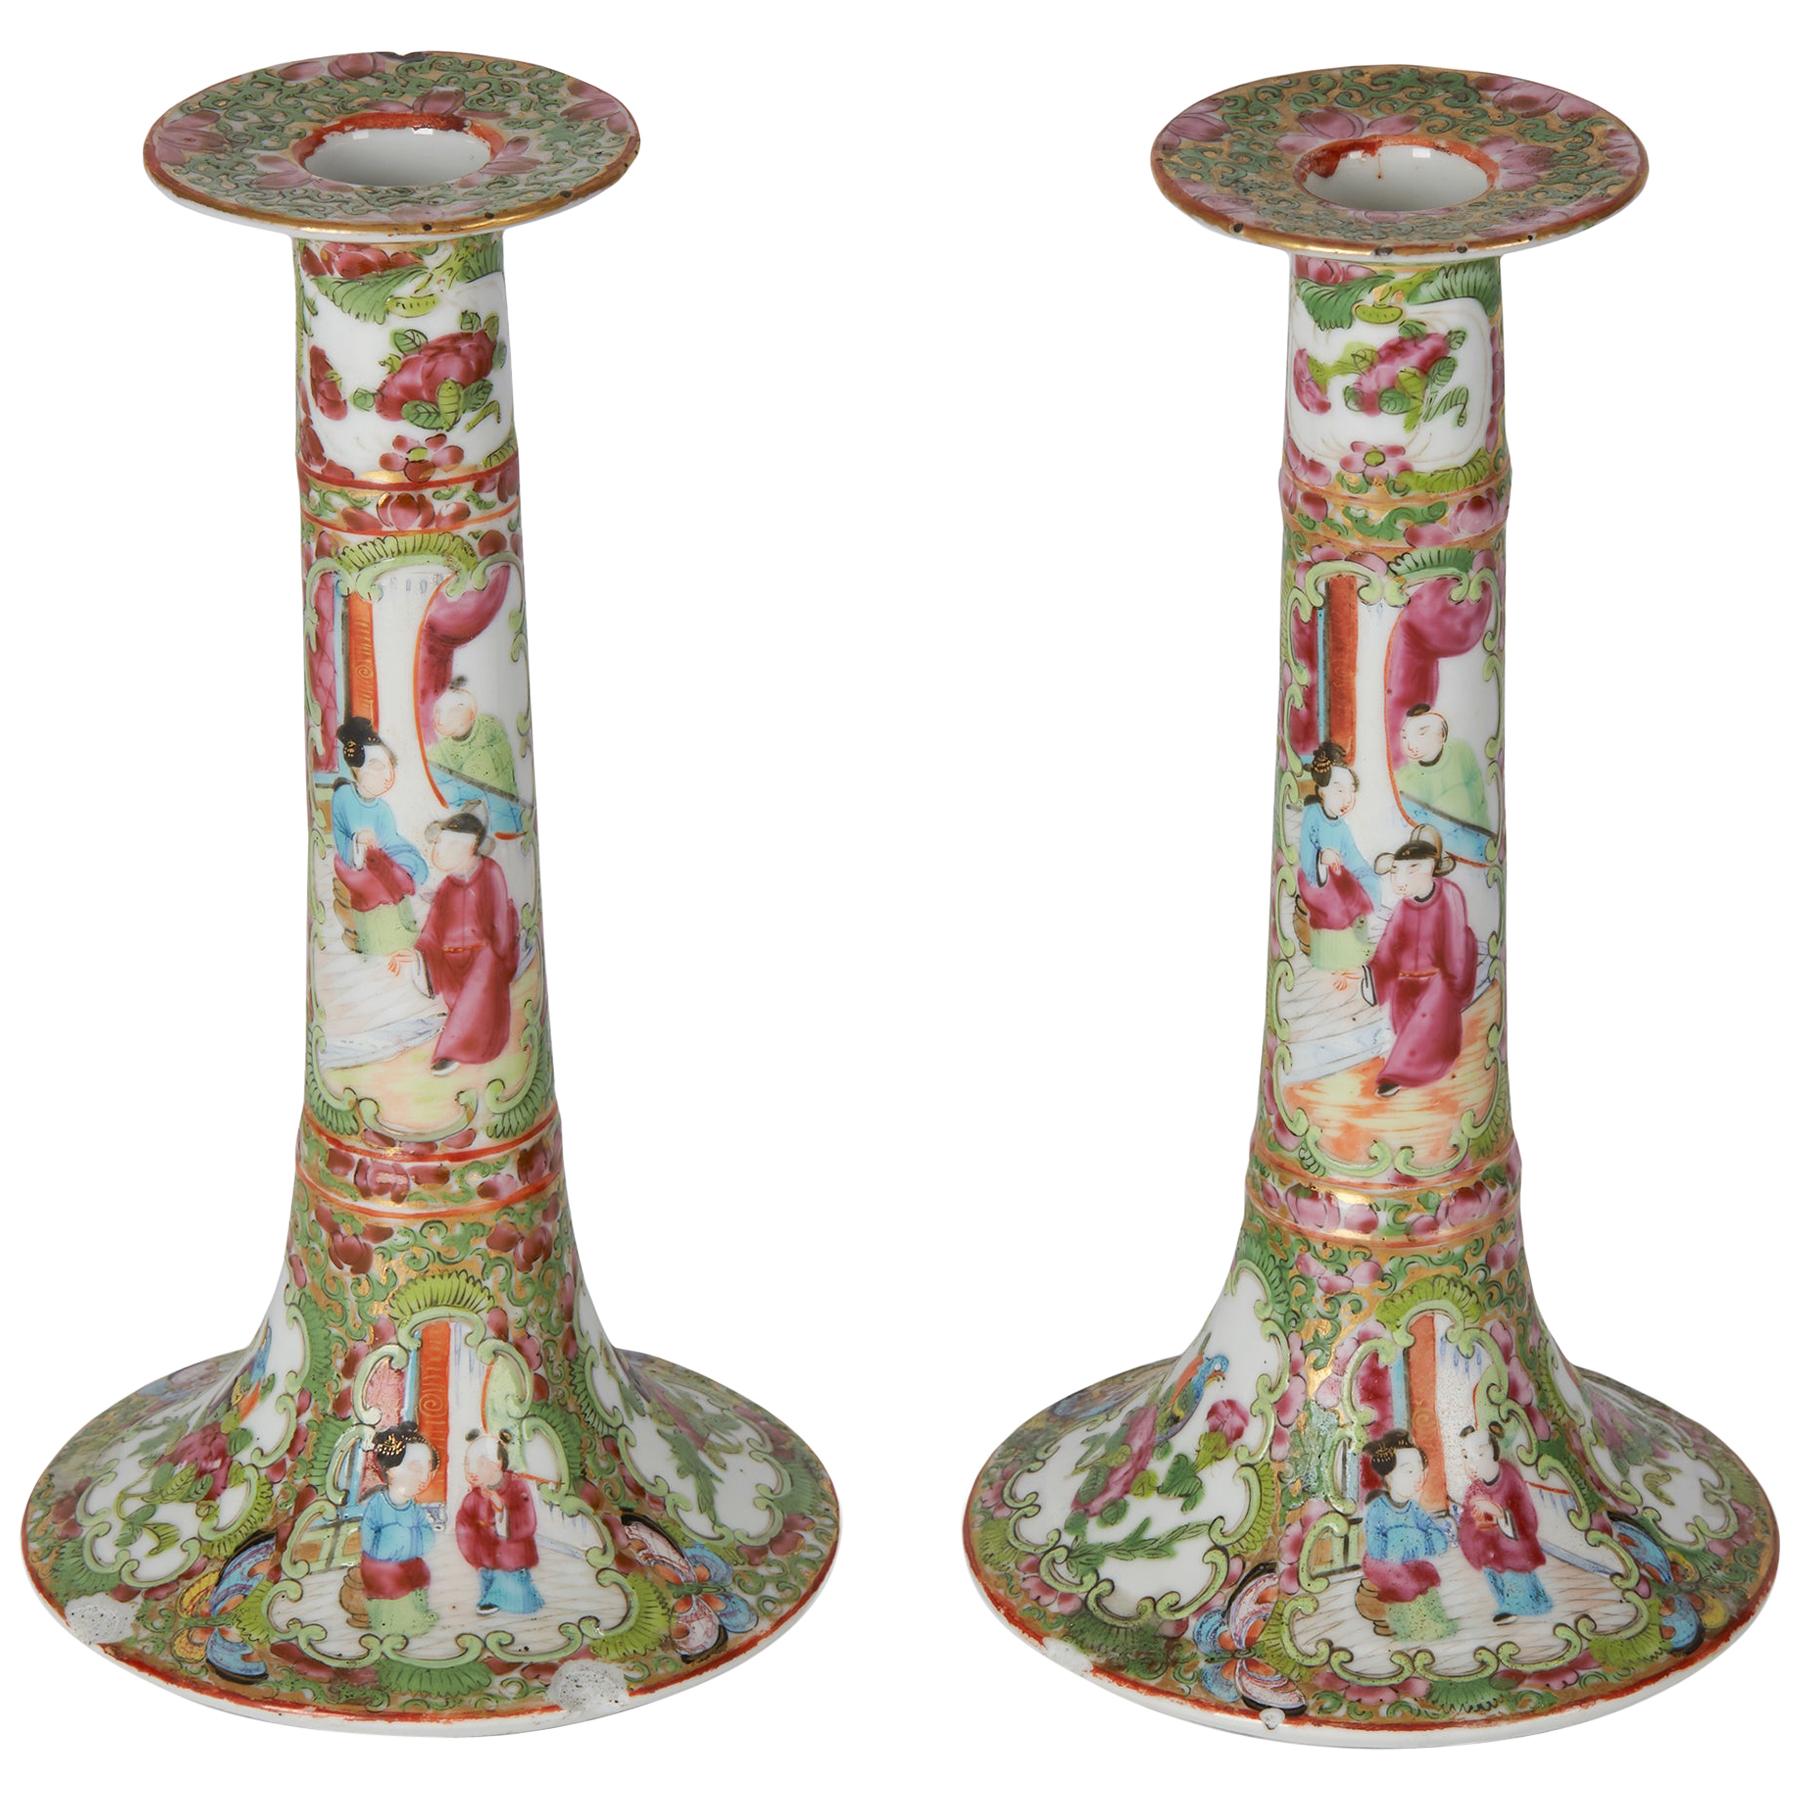 Pair of Chinese Canton Export Porcelain Famille Rose Candlesticks, 19th Century